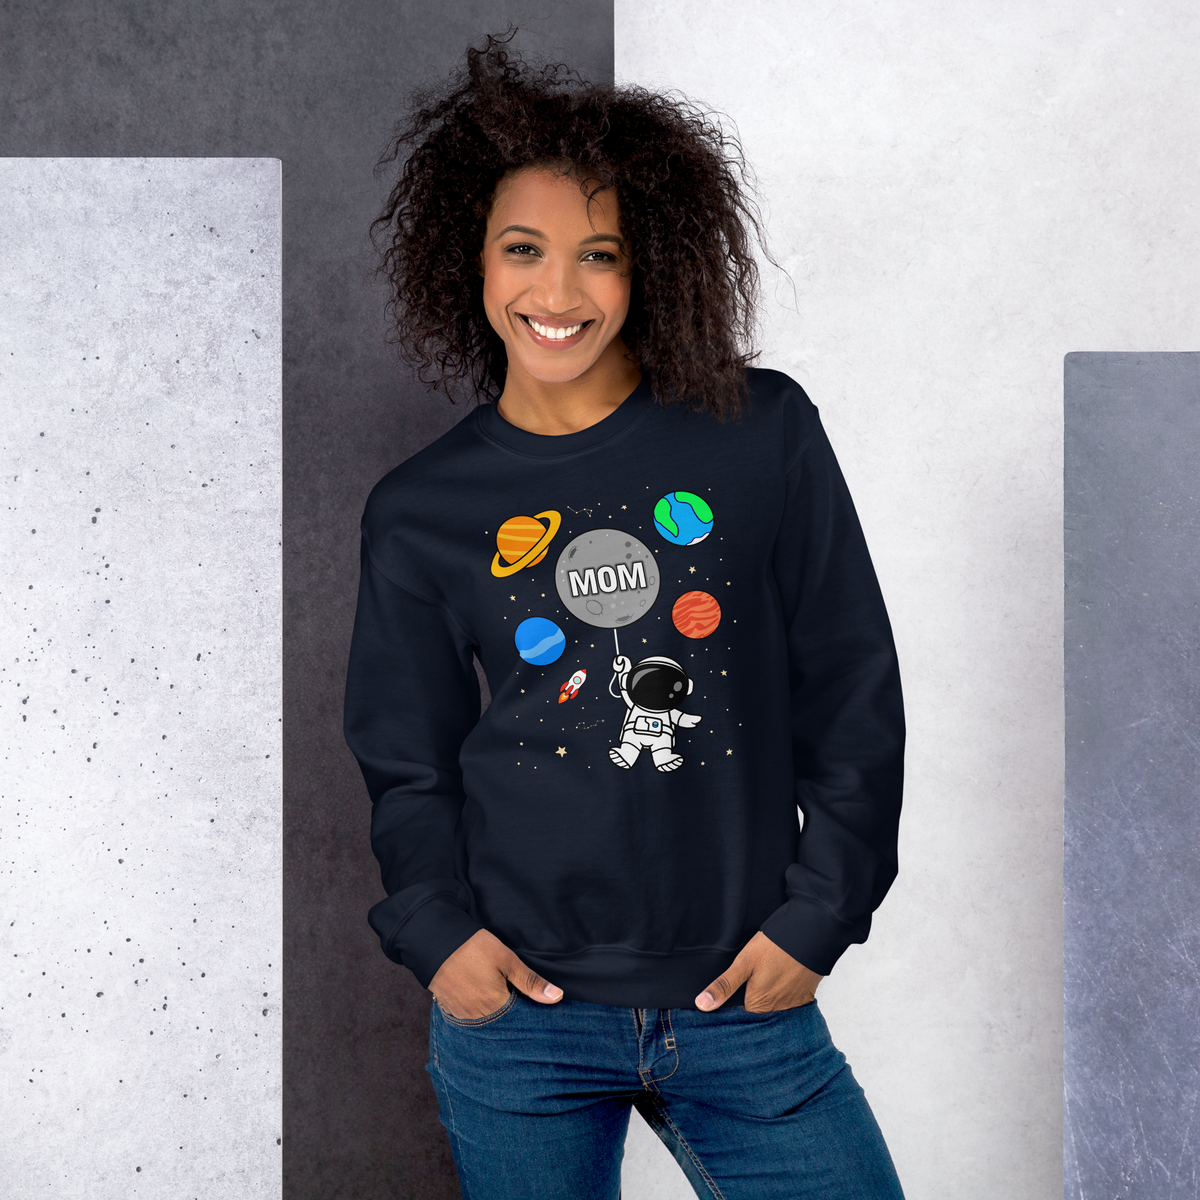 Space-Themed Birthday Sweater, Custom Family Set for Astronaut Party, Mom & Dad of Birthday Boy Sweatshirts, Astronomy & Rocket Gifts